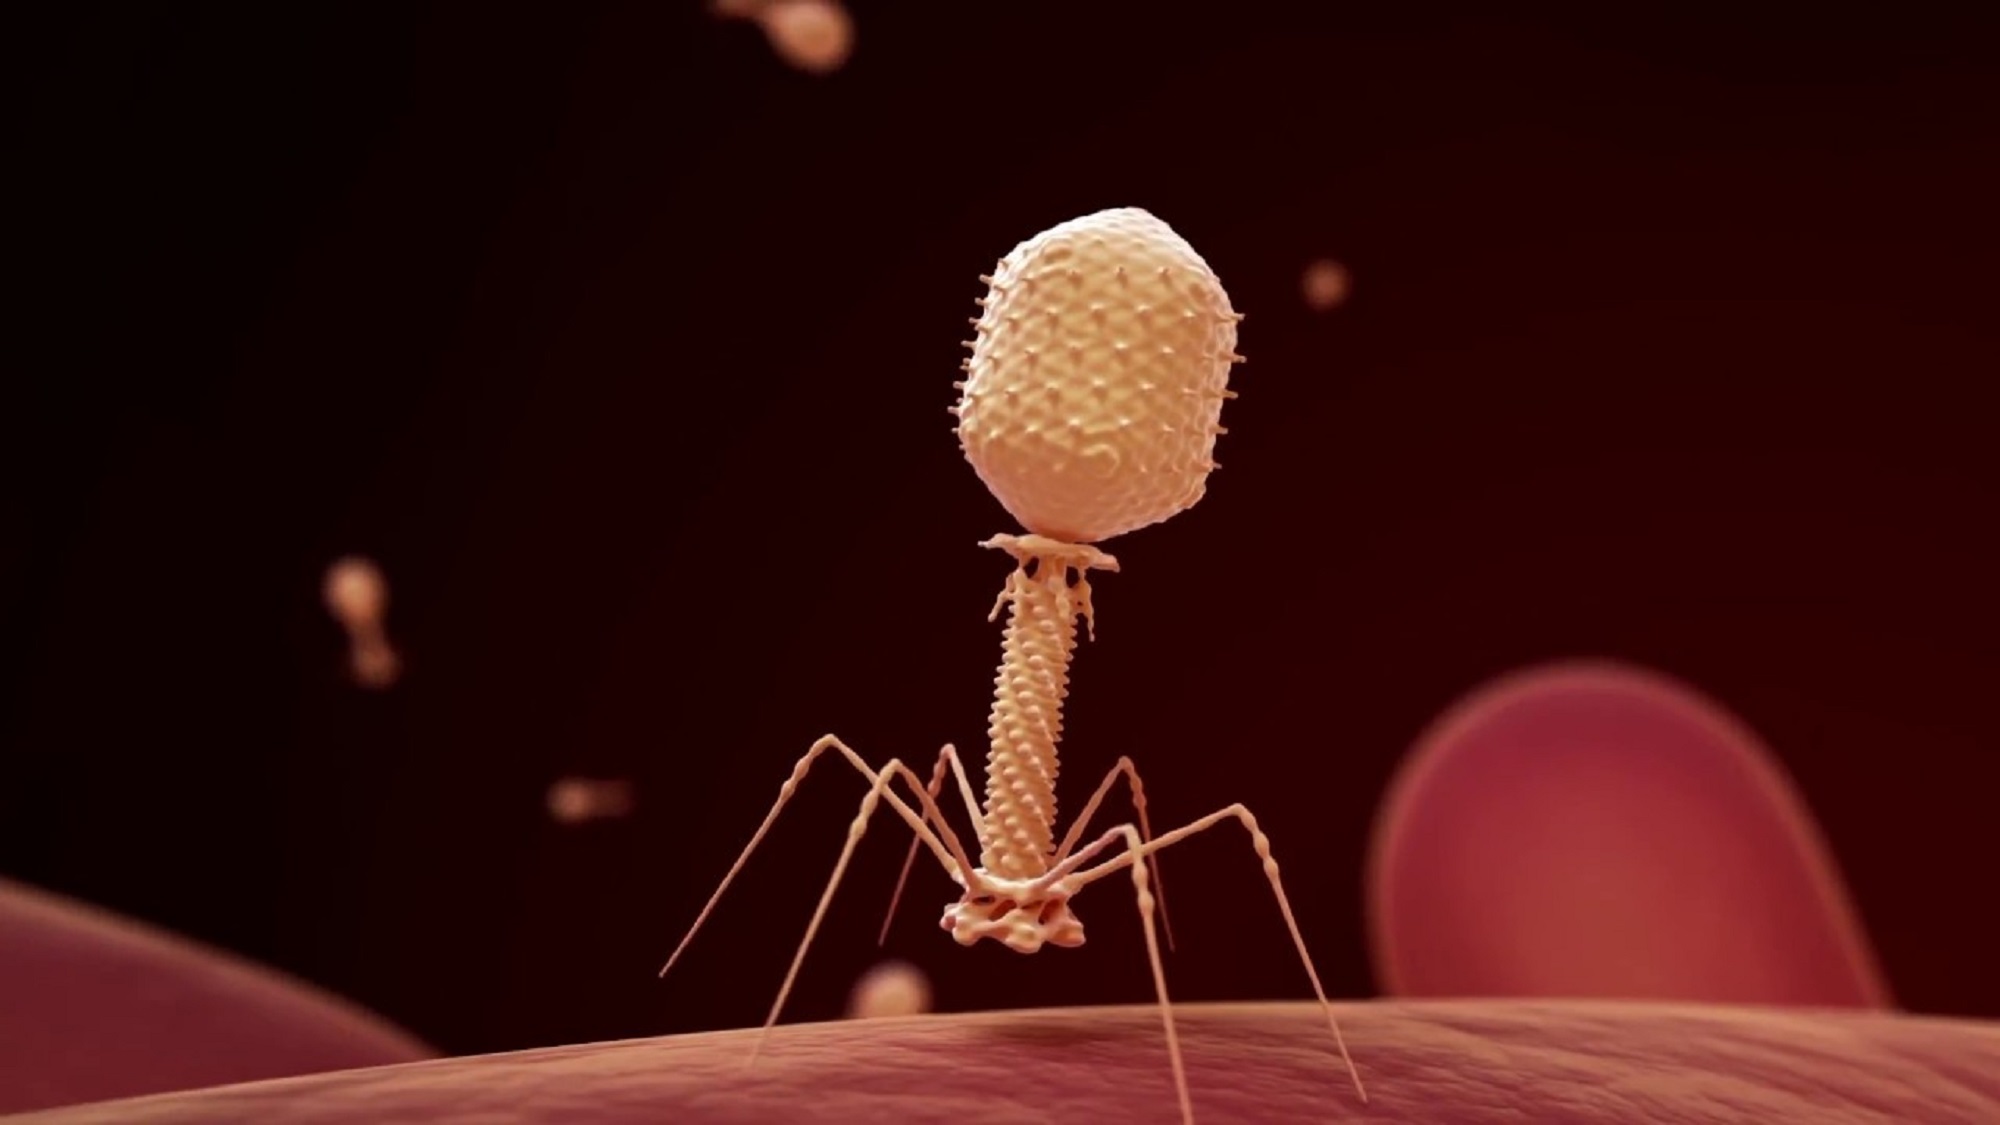 Bacteriophage destroying antibiotic-resistant bacteria during phage therapy. Illustration.